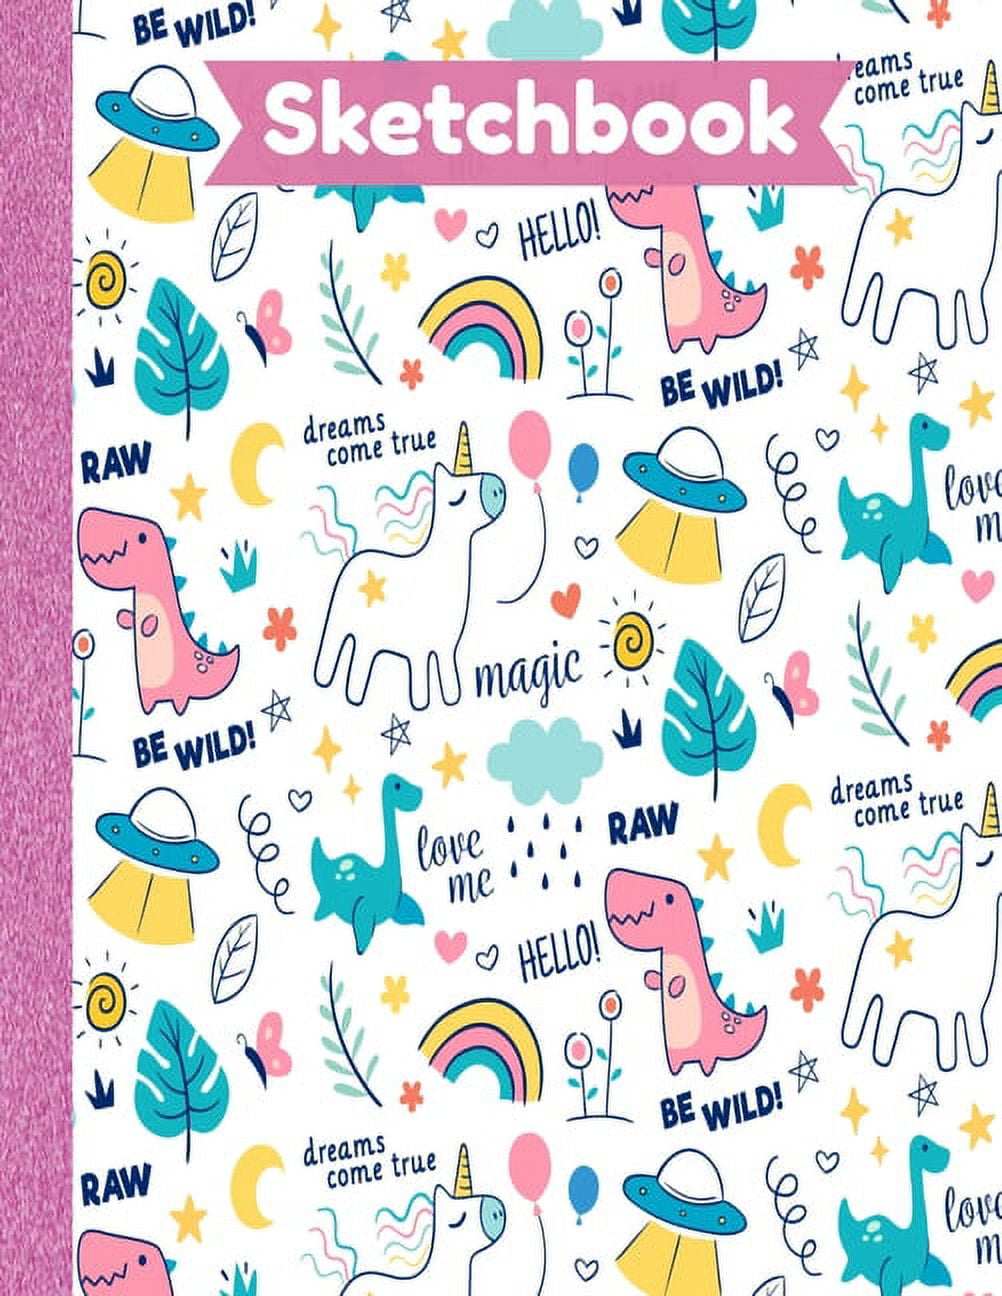 Sketchbook for Kids : Cute Unicorn Large Sketch Book for Drawing, Writing,  Painting, Sketching, Doodling and Activity Book- Birthday and Christmas  Gift Ideas for Kids, Girls, Boys, Teens and Women - Nathalie